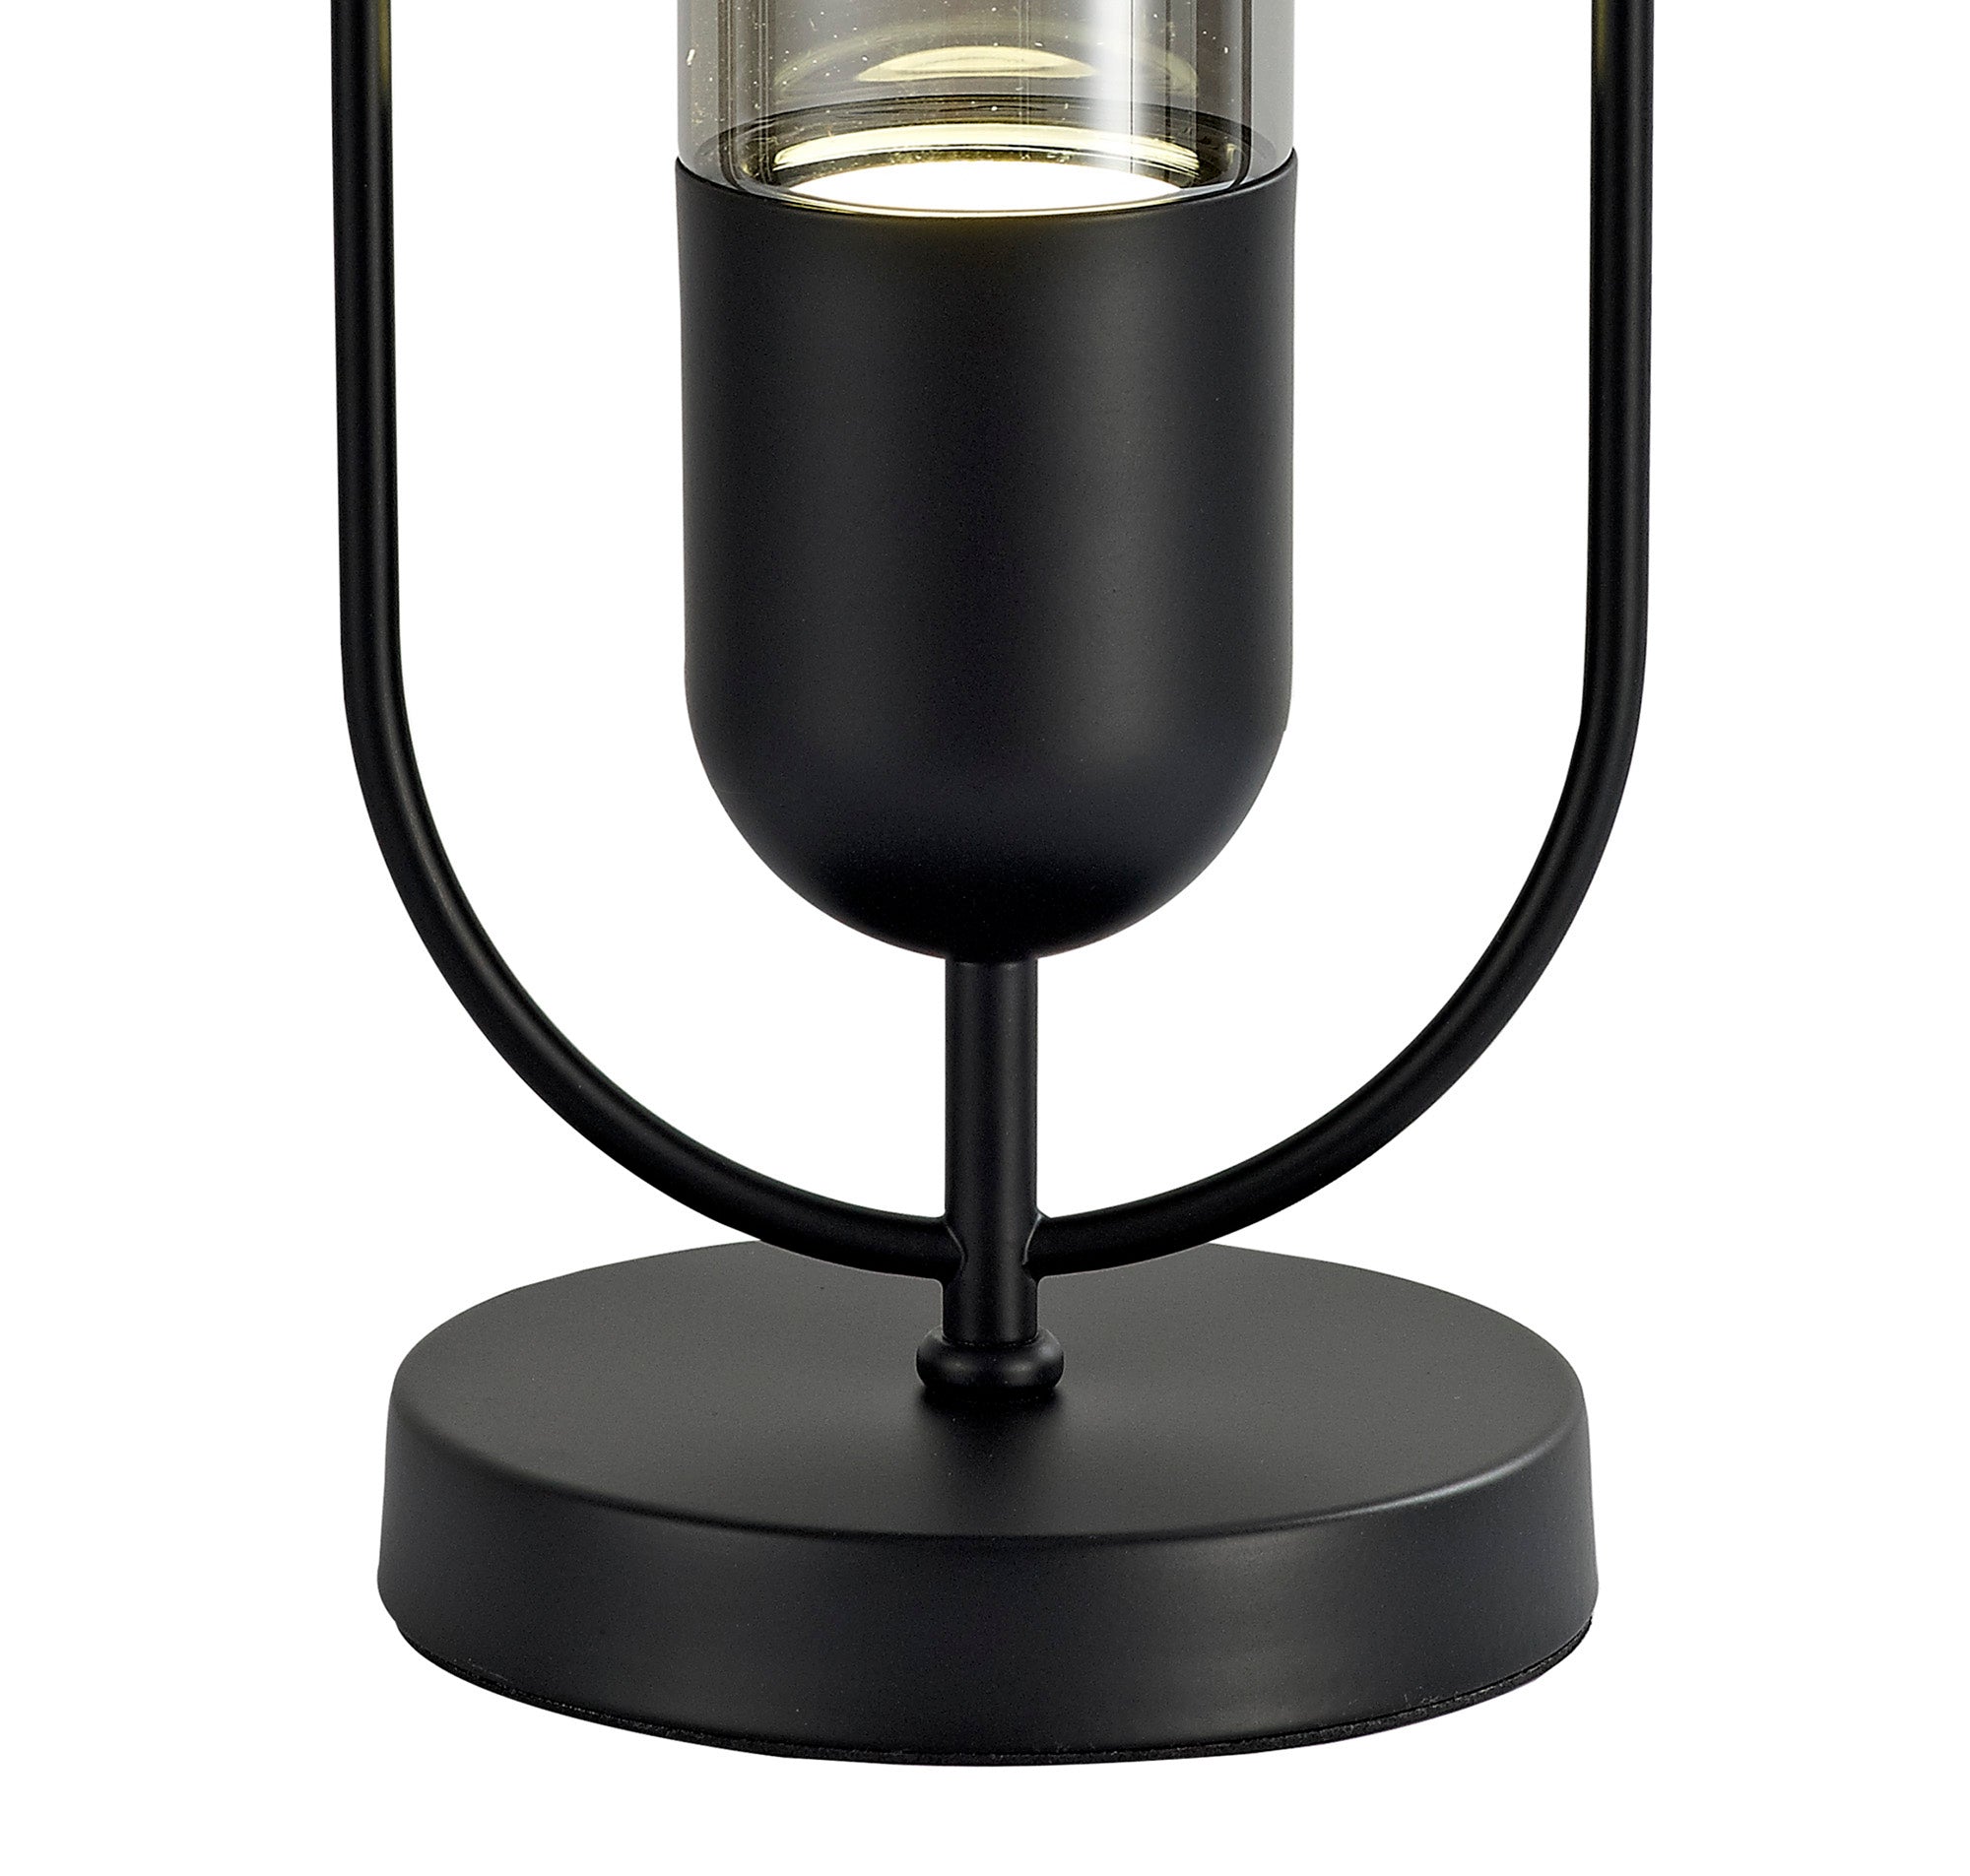 Neo Table Lamp, 1 x 7W LED, 4000K, 790lm, Black/Smoked, 3yrs Warranty